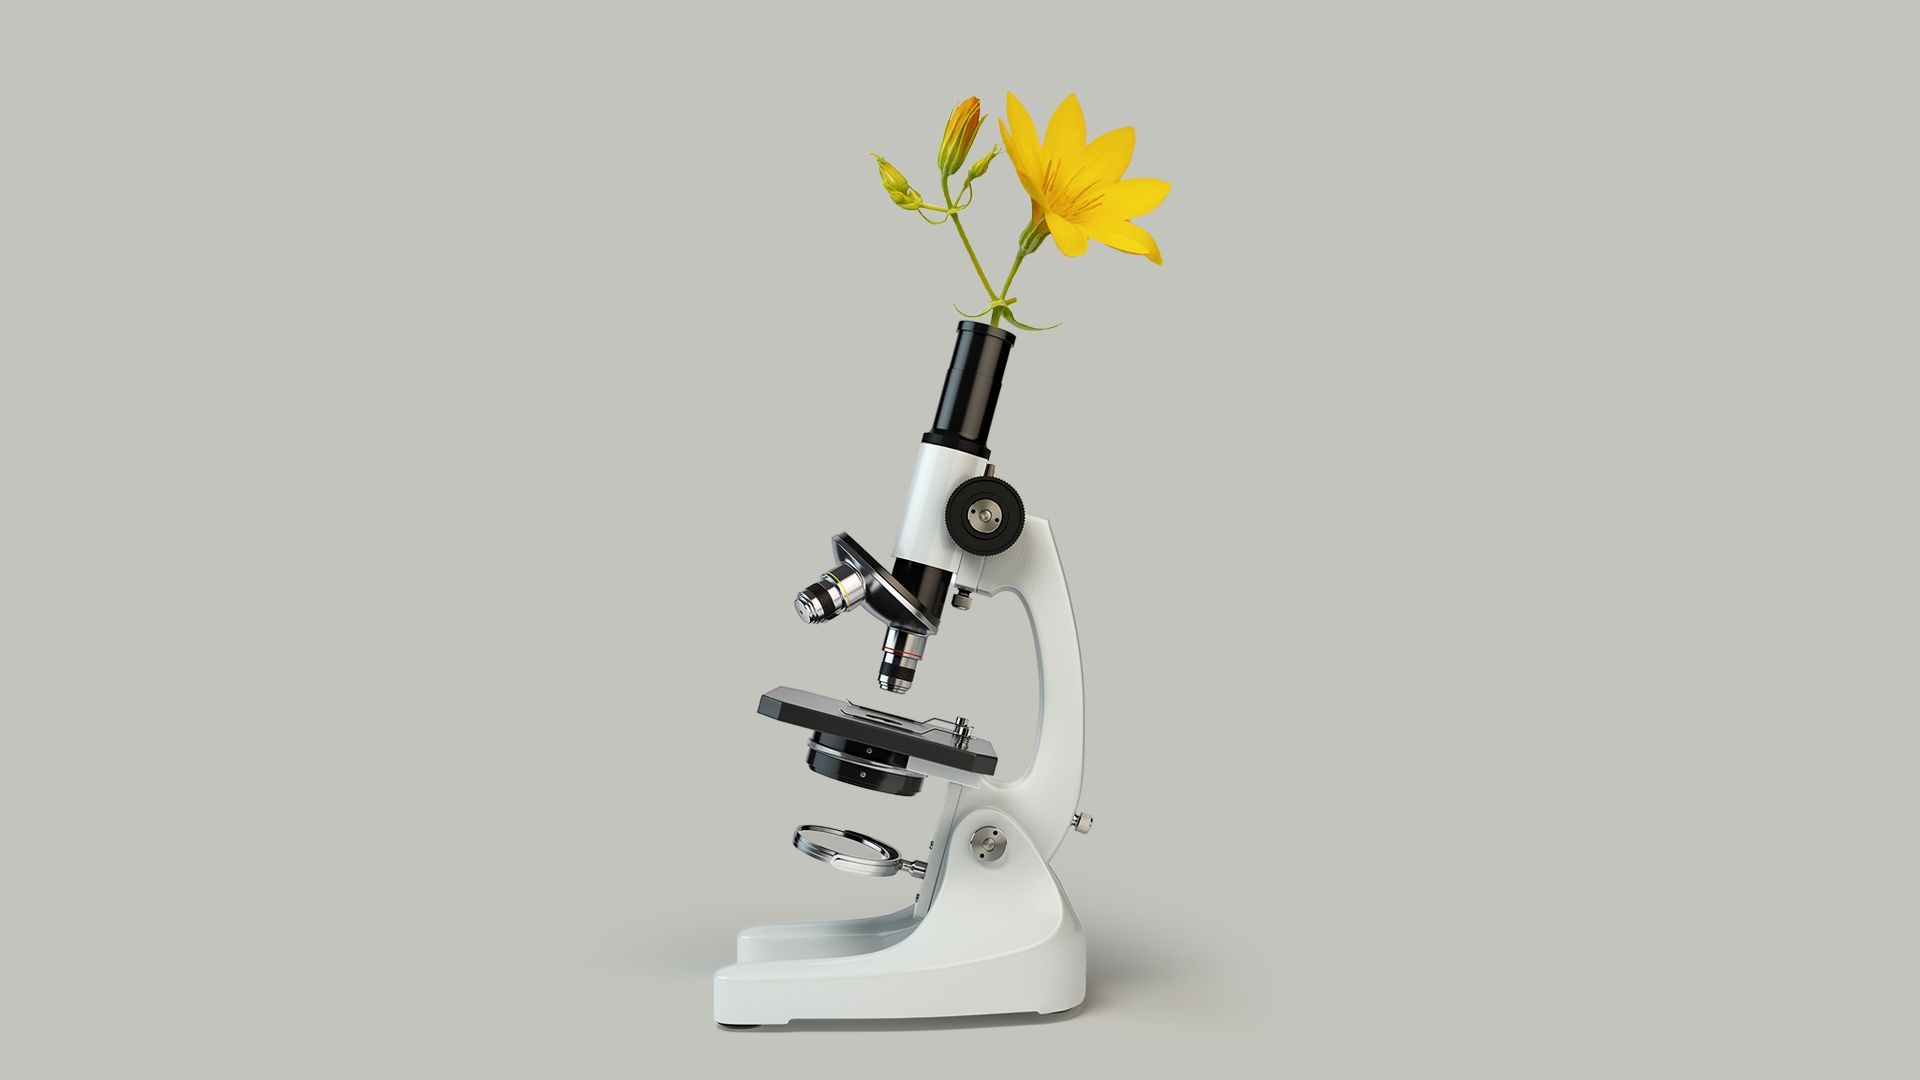 Illustration of a microscope with a flower extending from the eyepiece and tube